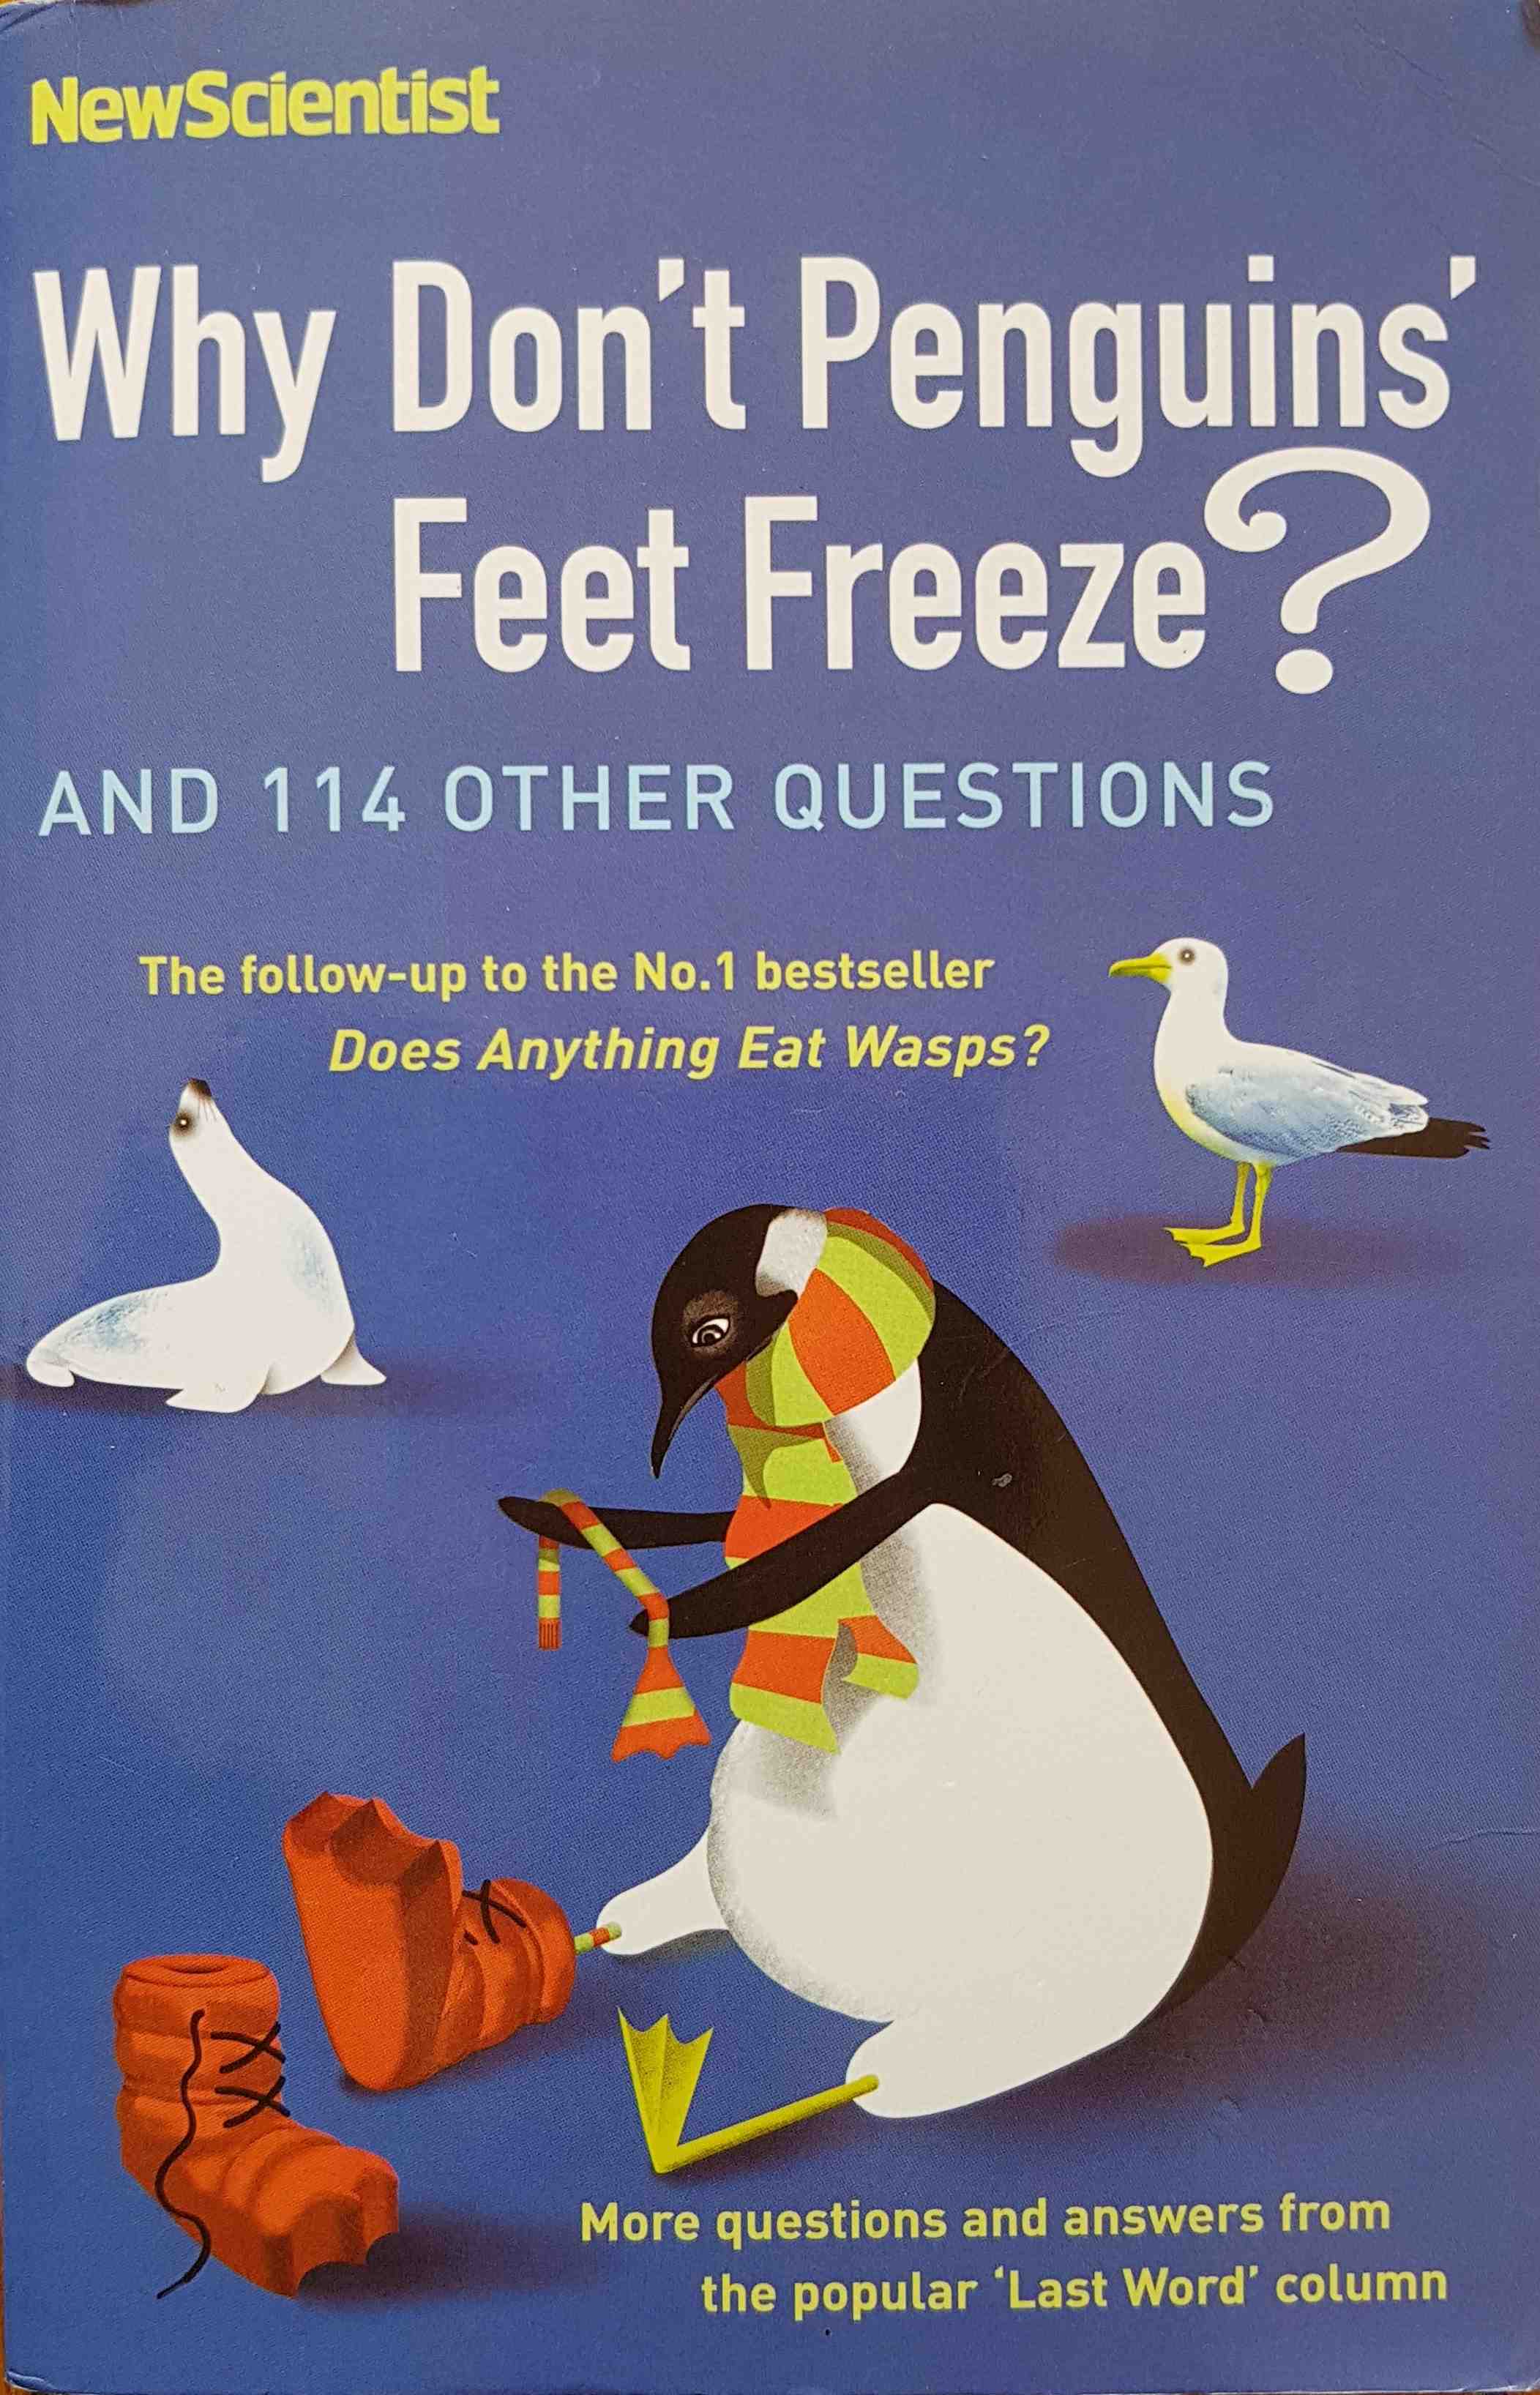 Picture of 1-86197-876-6 Why don't penguins' feet freeze? by artist Mick O'Hare 